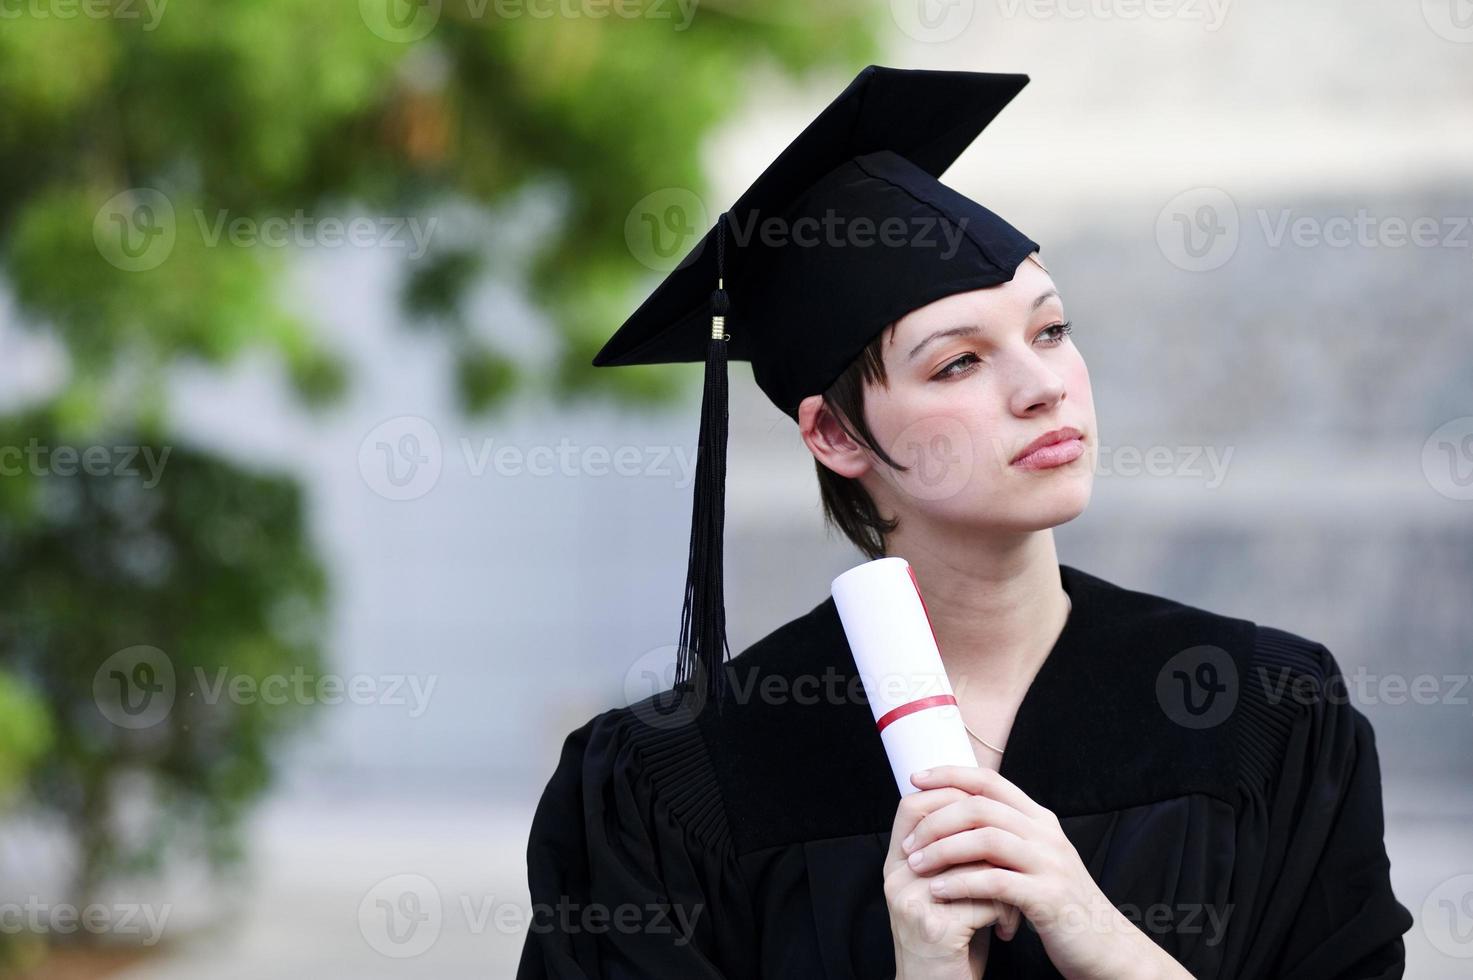 Happy woman portrait on her graduation day smiling photo